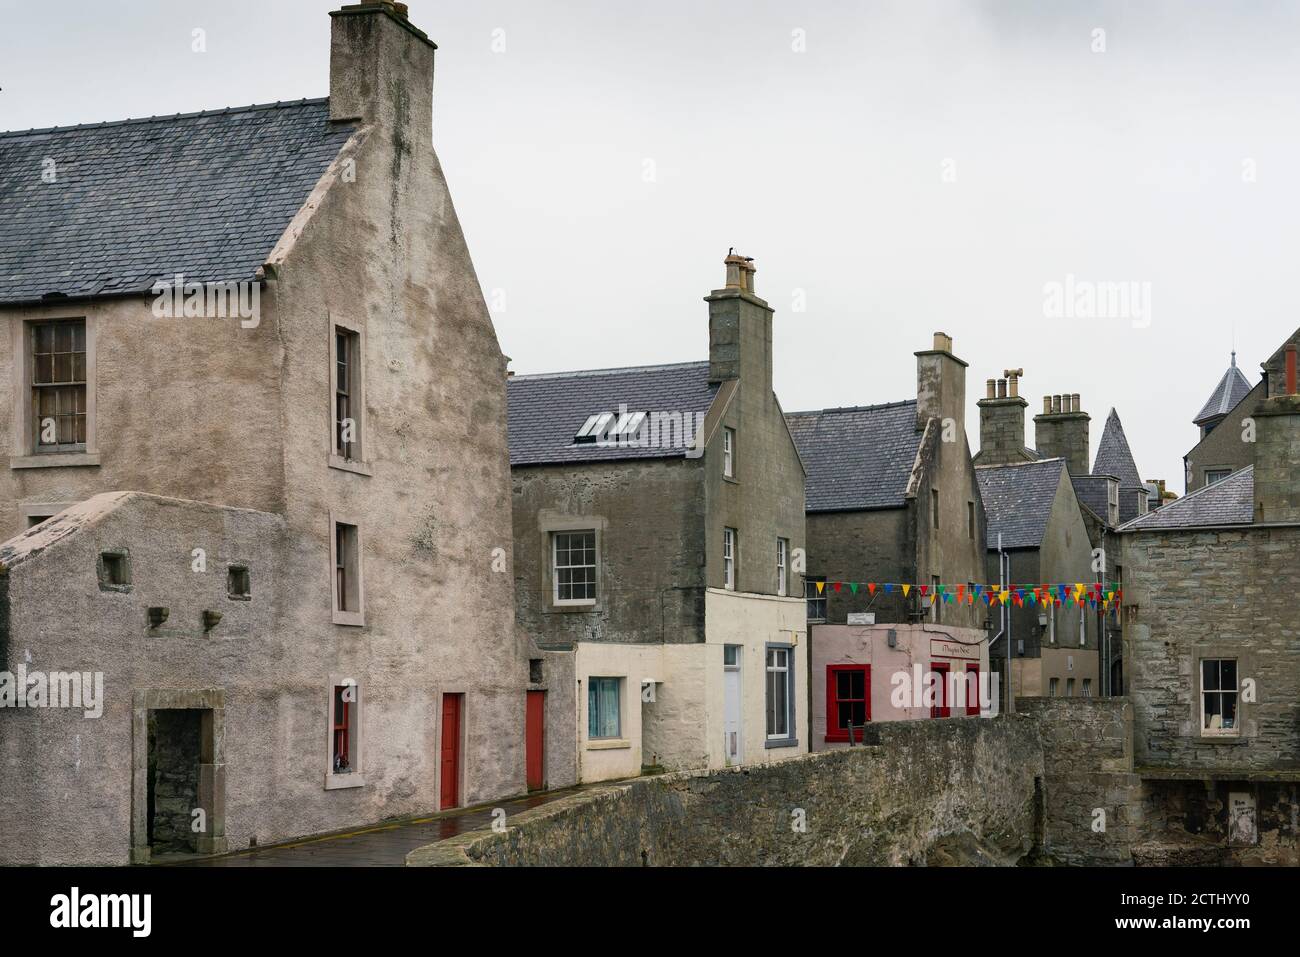 View of old buildings on Commercial Street  in old town of Lerwick, Shetland Isles, Scotland, UK Stock Photo